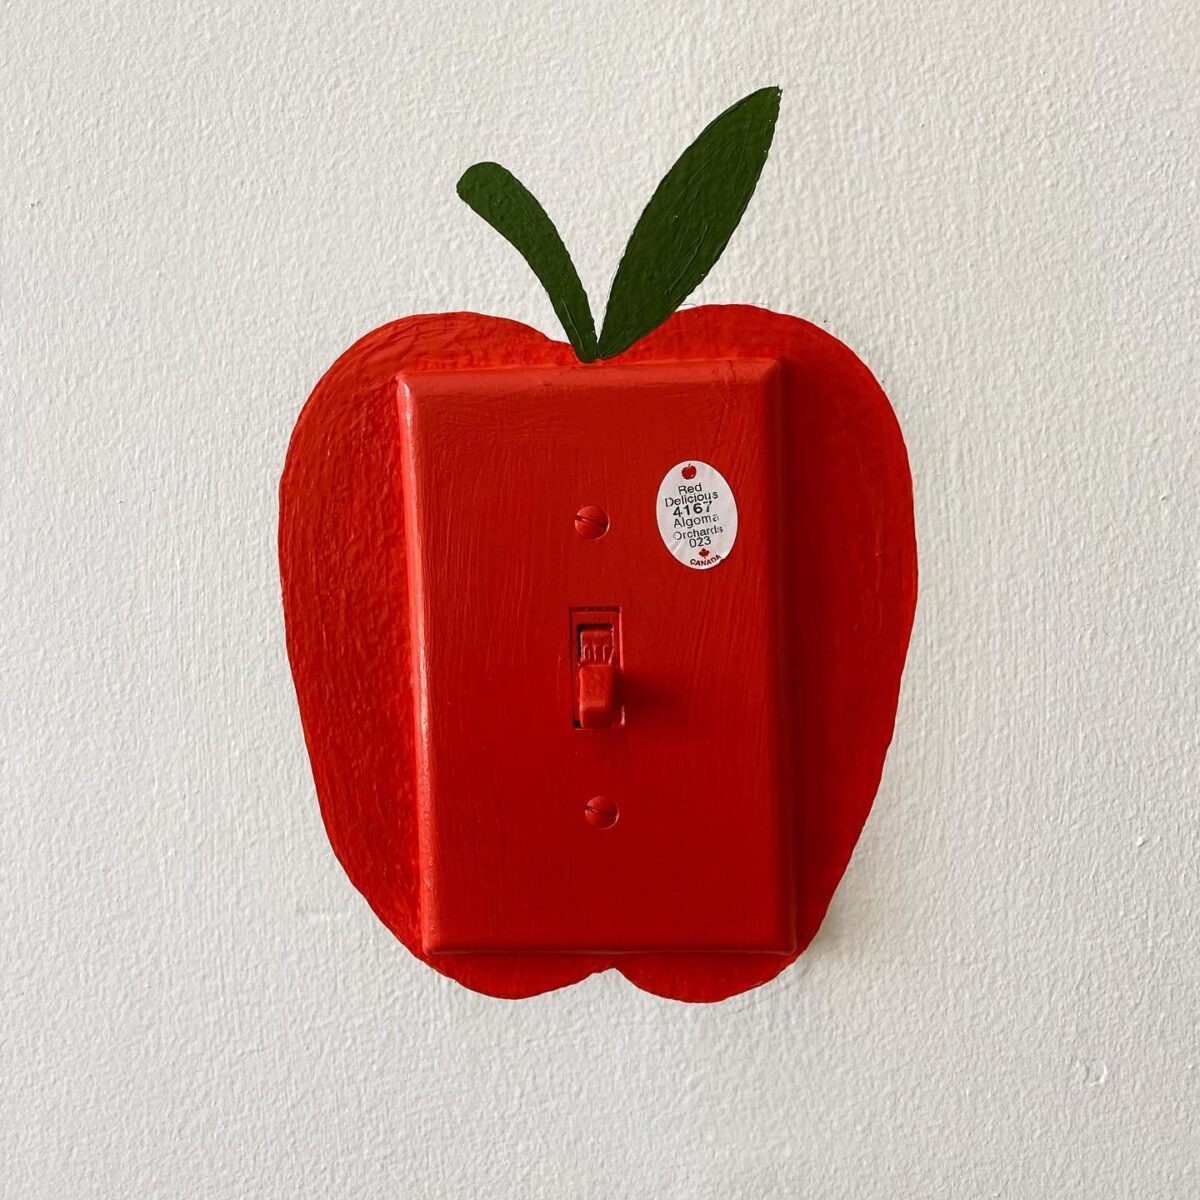 Red apple painted over light switch | How to Add Pops of Color to Your Home on a Budget